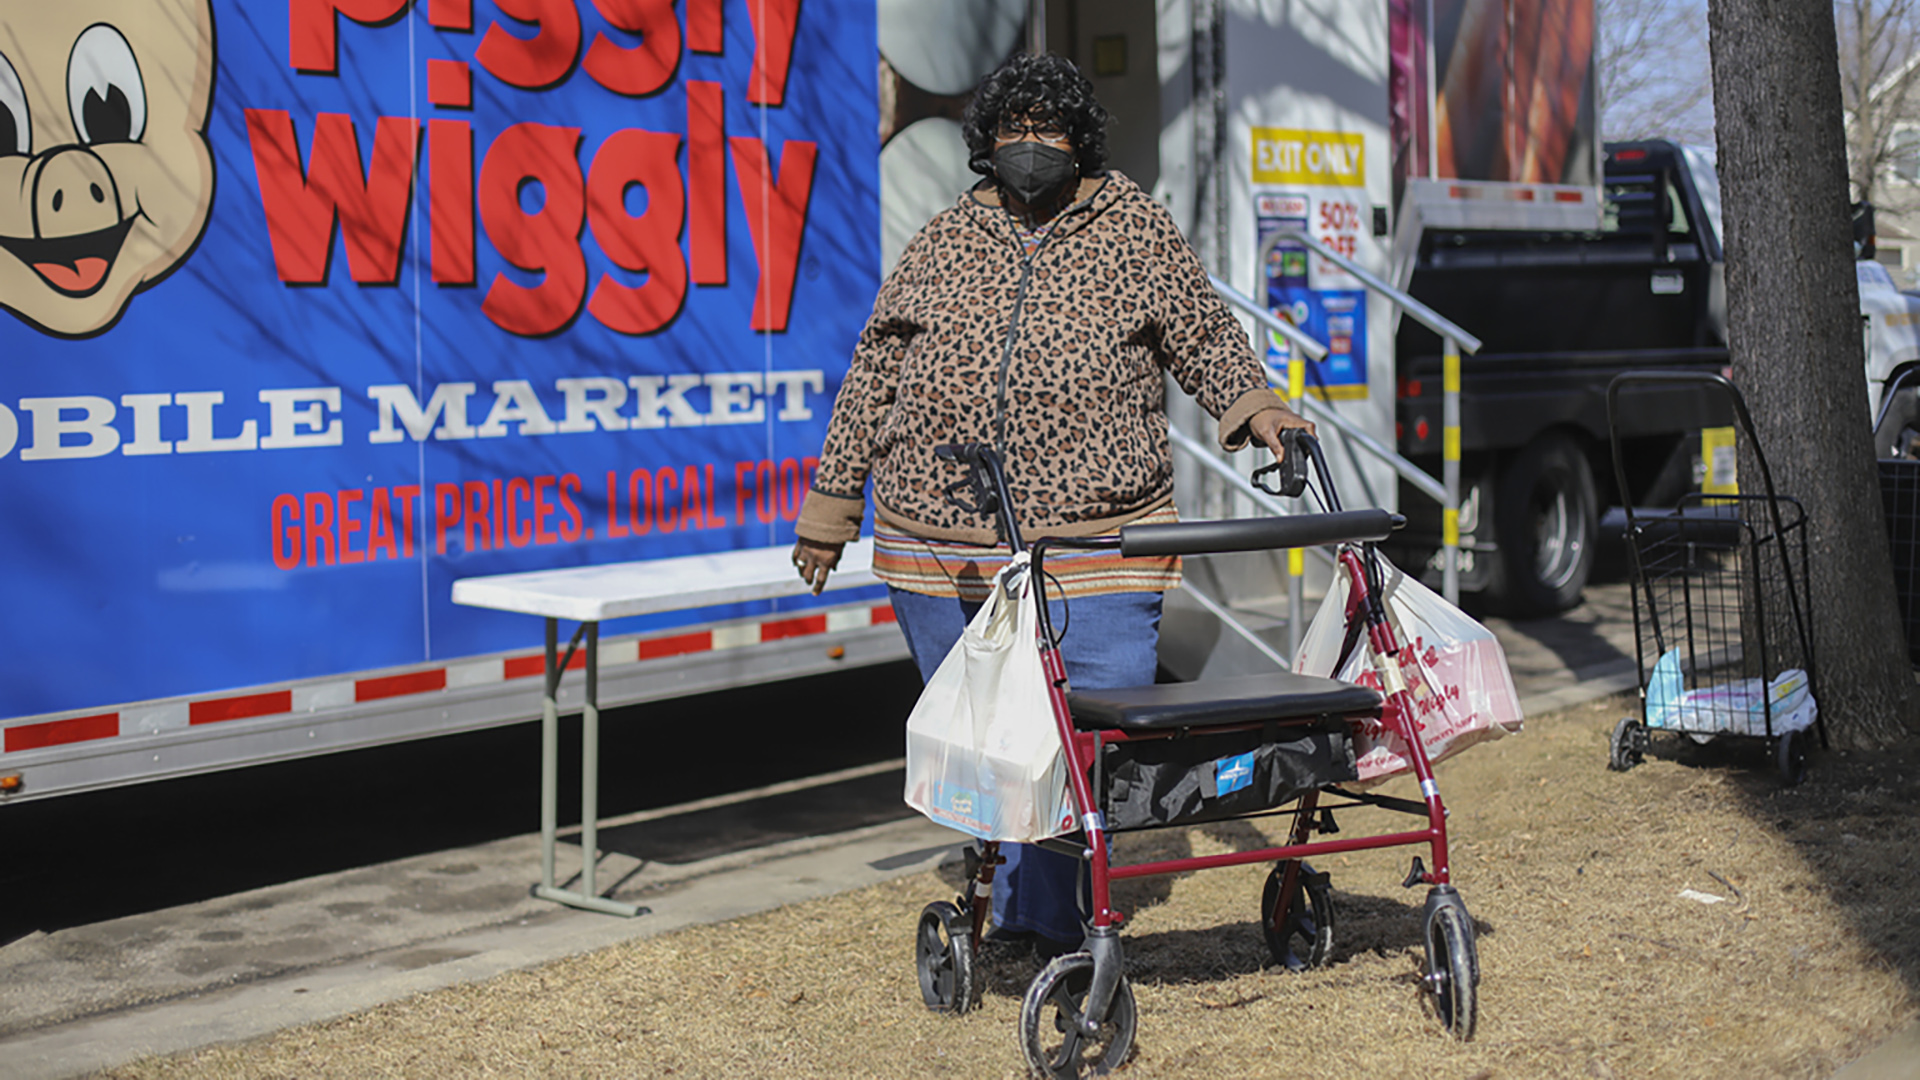 Shirley Johnson stands behind a mobility walker with two filled plastic grocery bags hanging on it while standing in front of a mobile market with the Piggly Wiggly logo, wordmark and a slogan reading "Great Prices. Local Food."